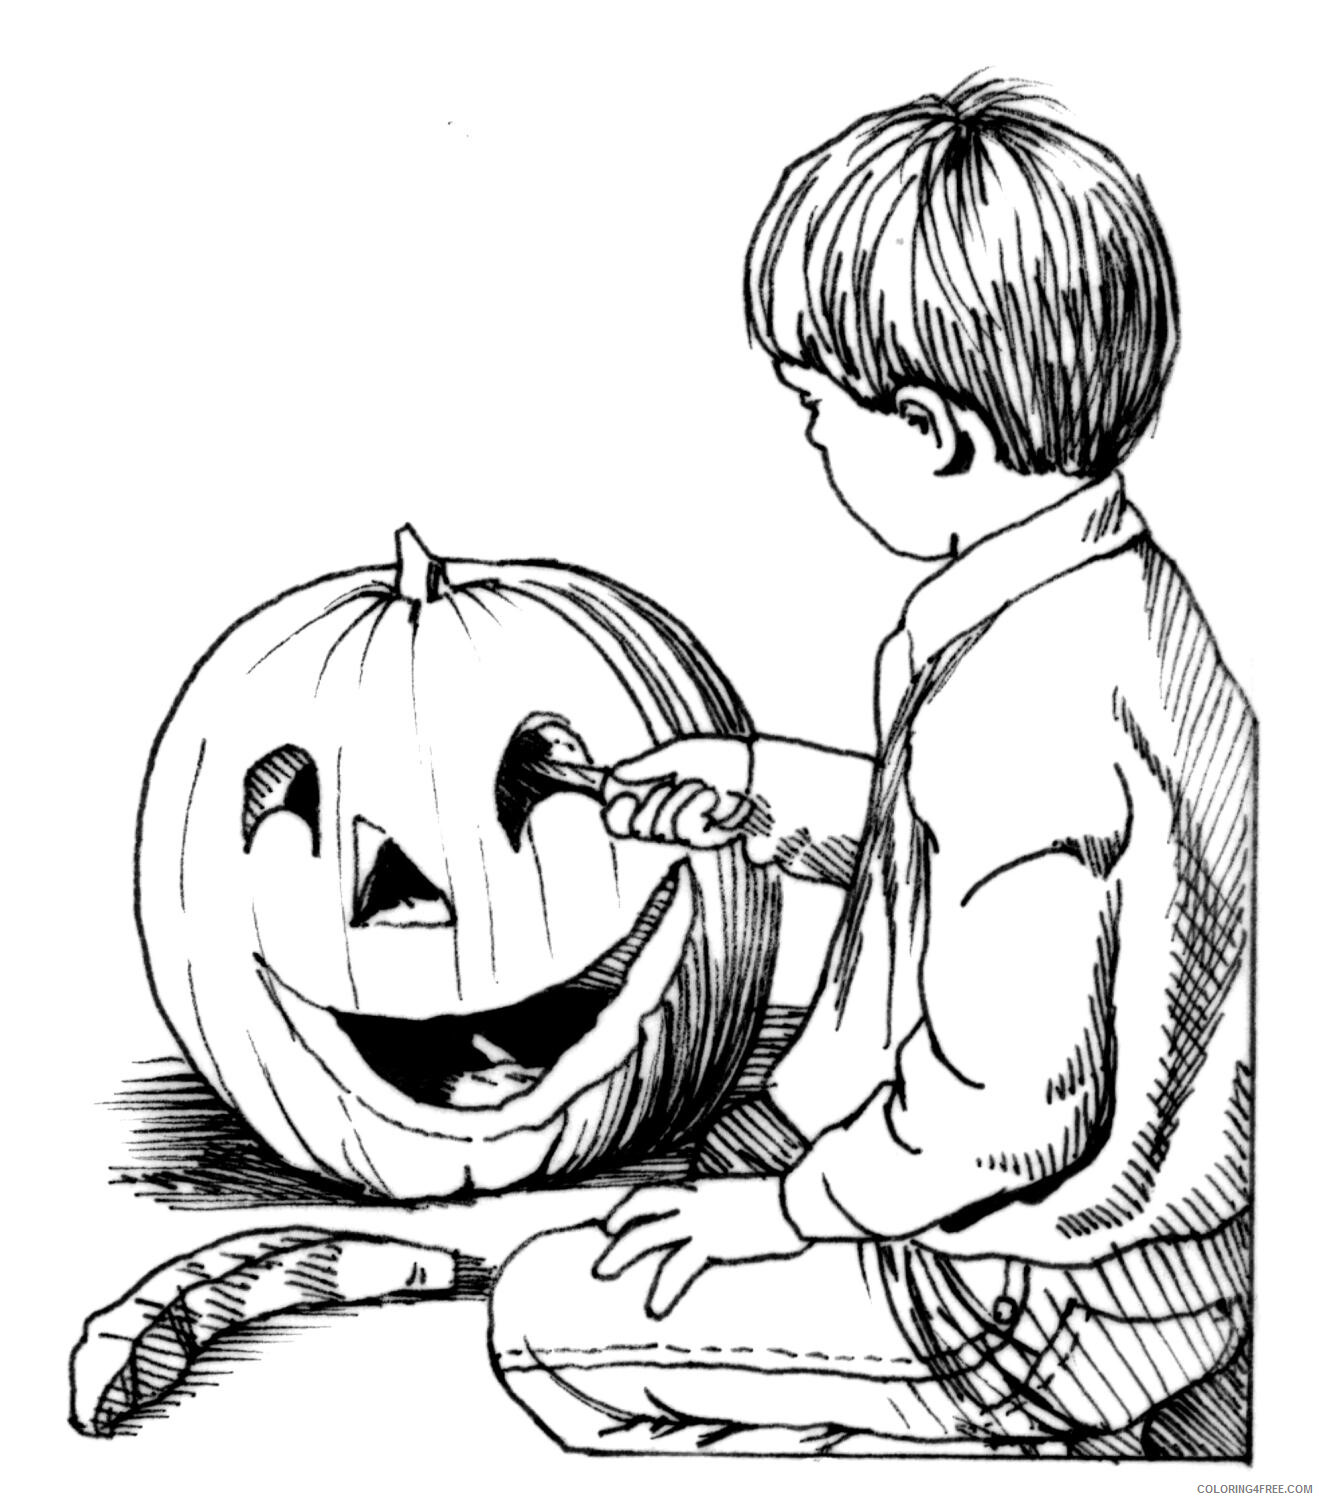 Pumpkin Coloring Pages Vegetables Food Carving Pumpkin for Halloween 2021 Coloring4free